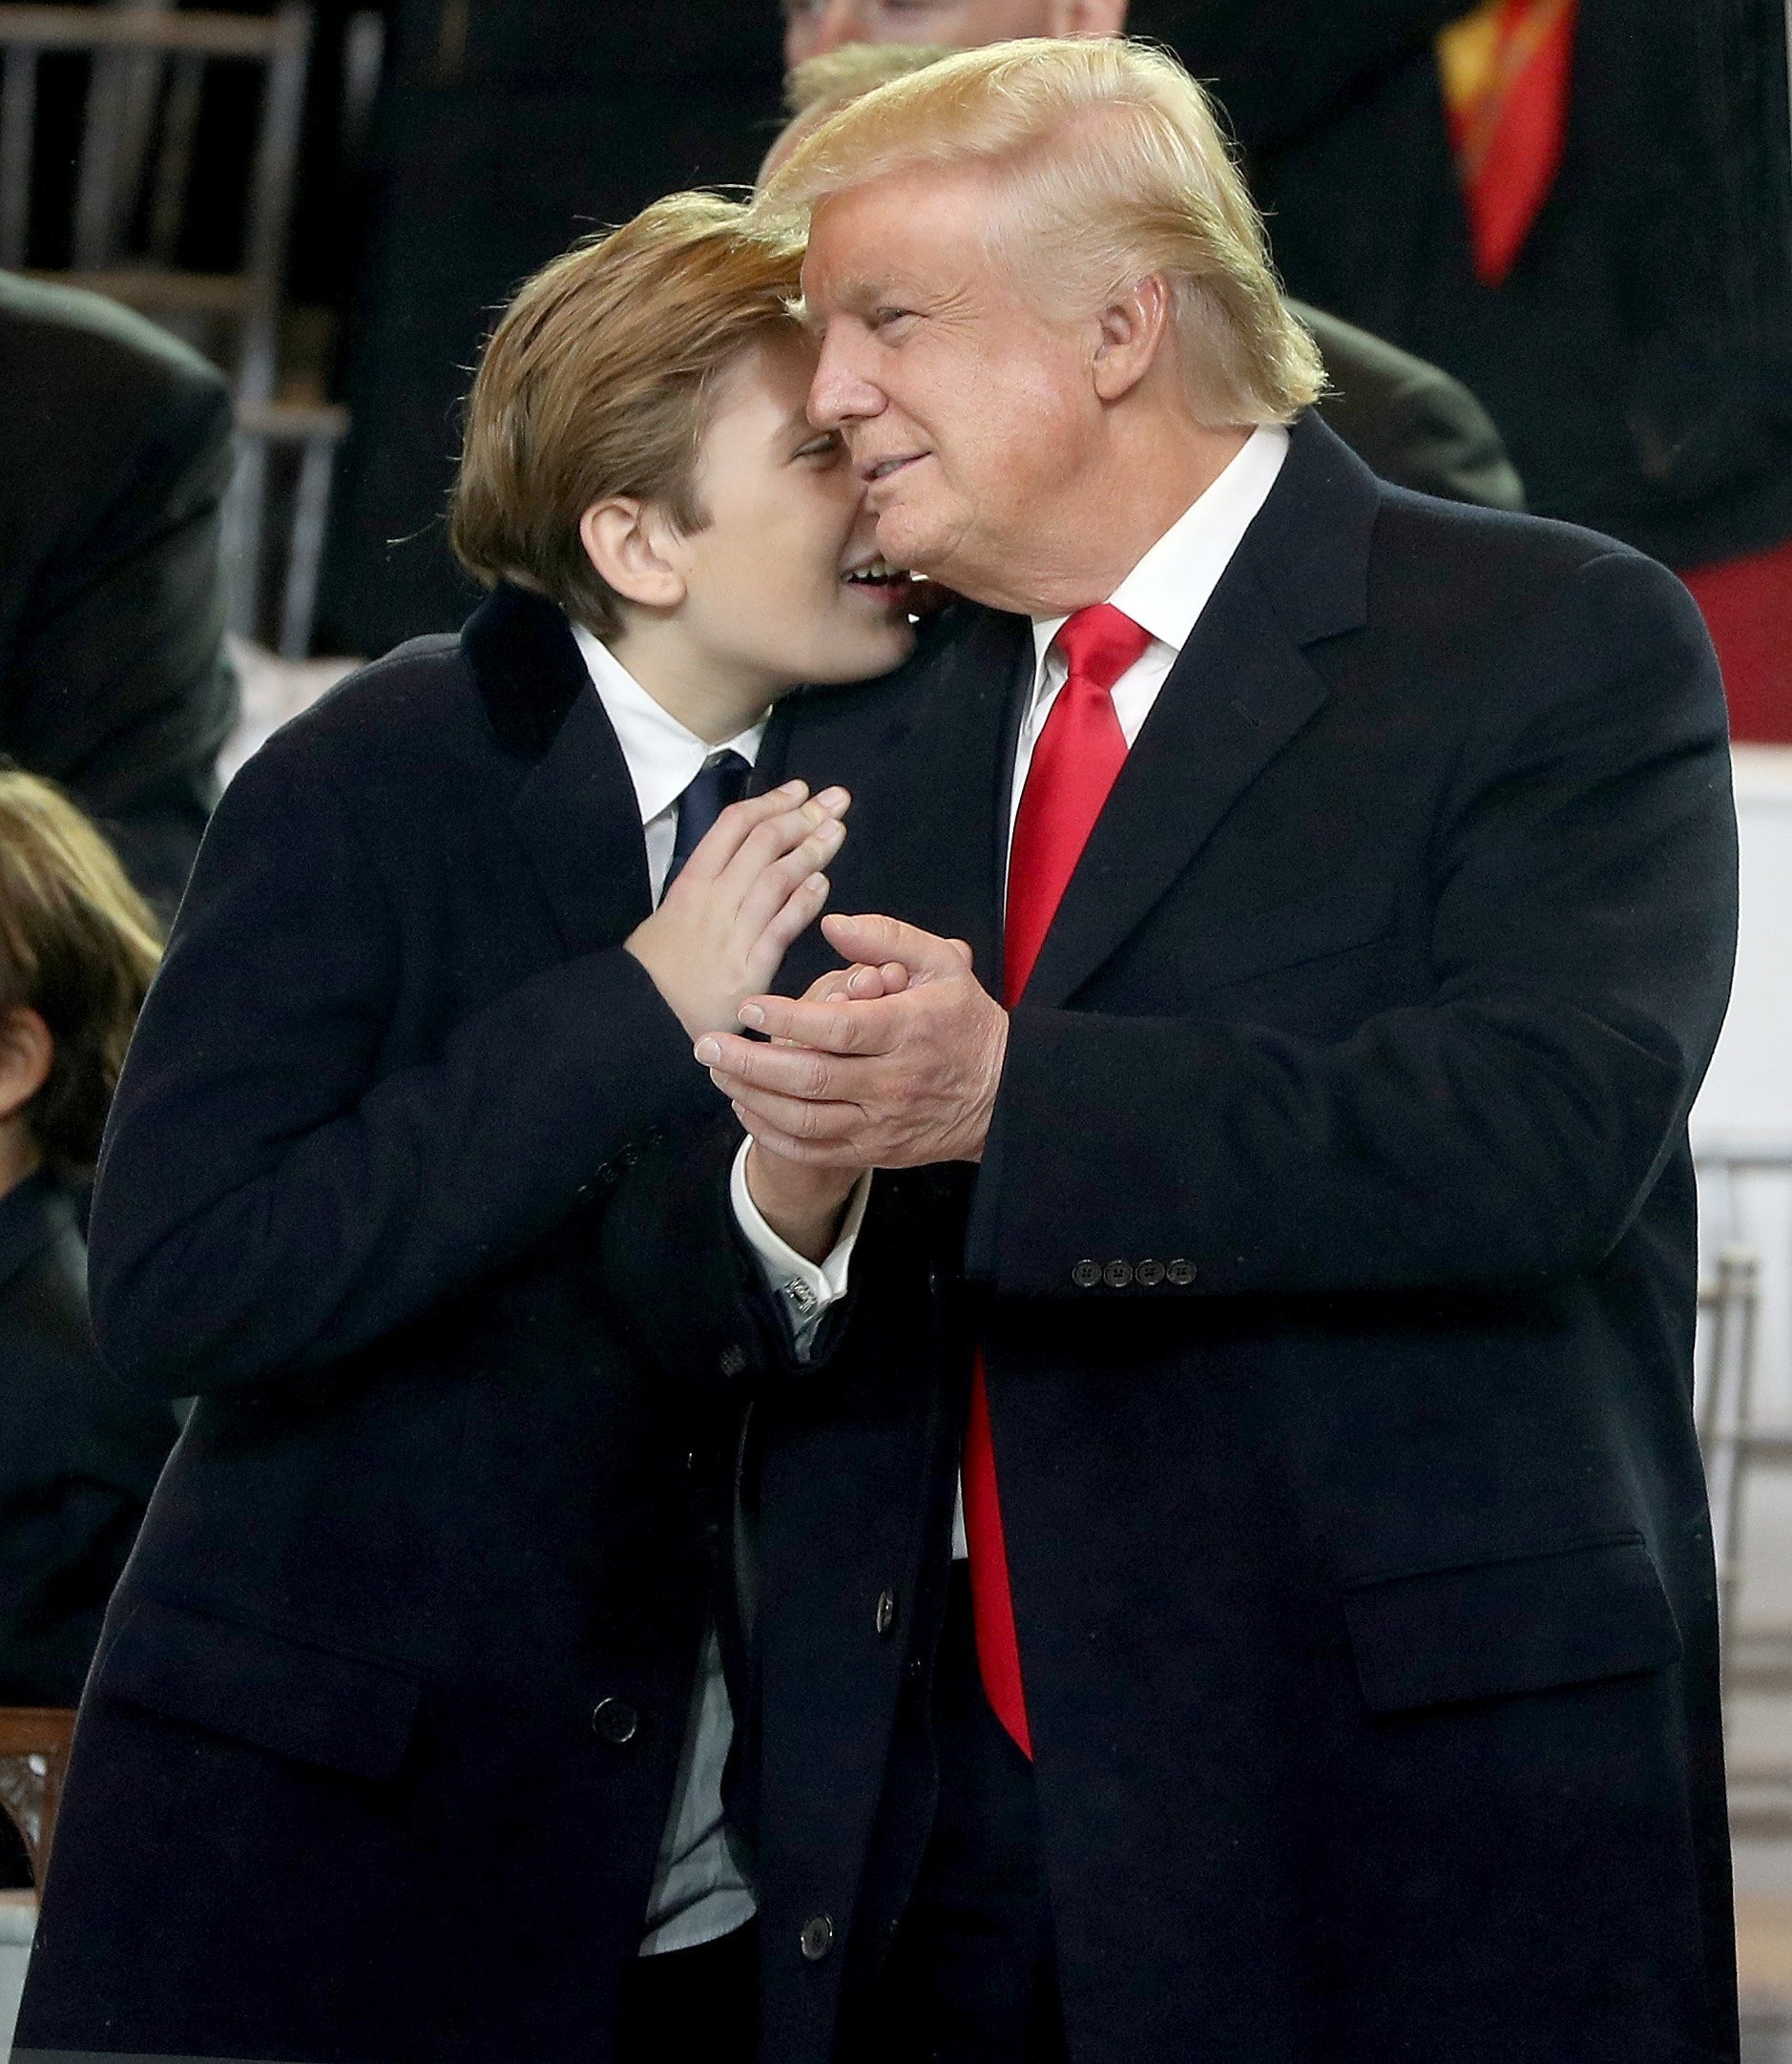 Barron Trump whispering to father President Donald Trump | Photo: Getty Images